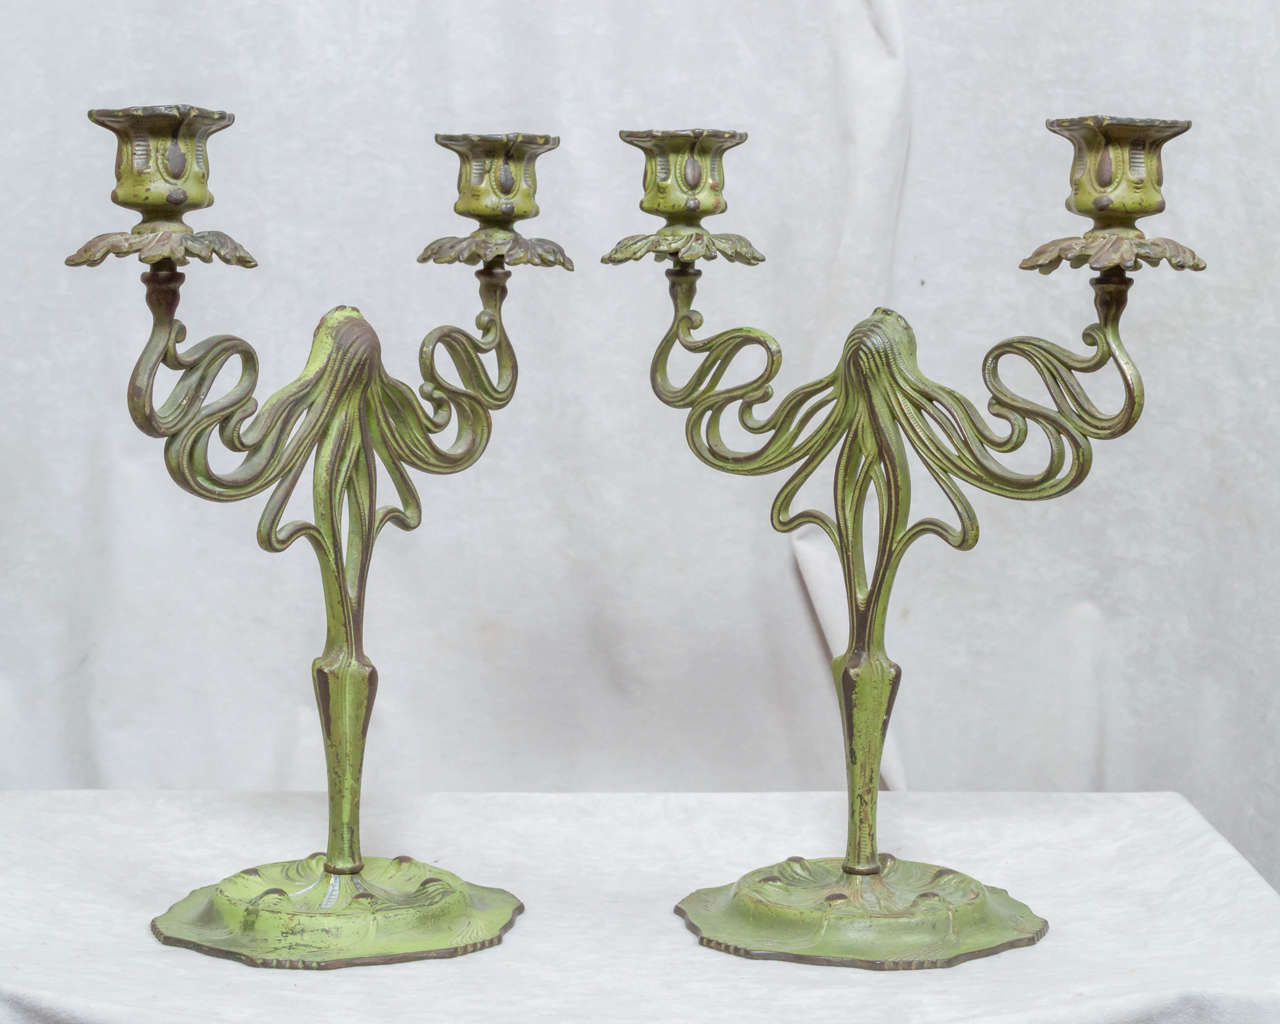 This lovely, sinewy pair of candlesticks demonstrates the allure of Art Nouveau. Having curvilinear lines and the sweet cameo of the woman's face in the center are so very appealing. They have their original green factory applied patina. Similar